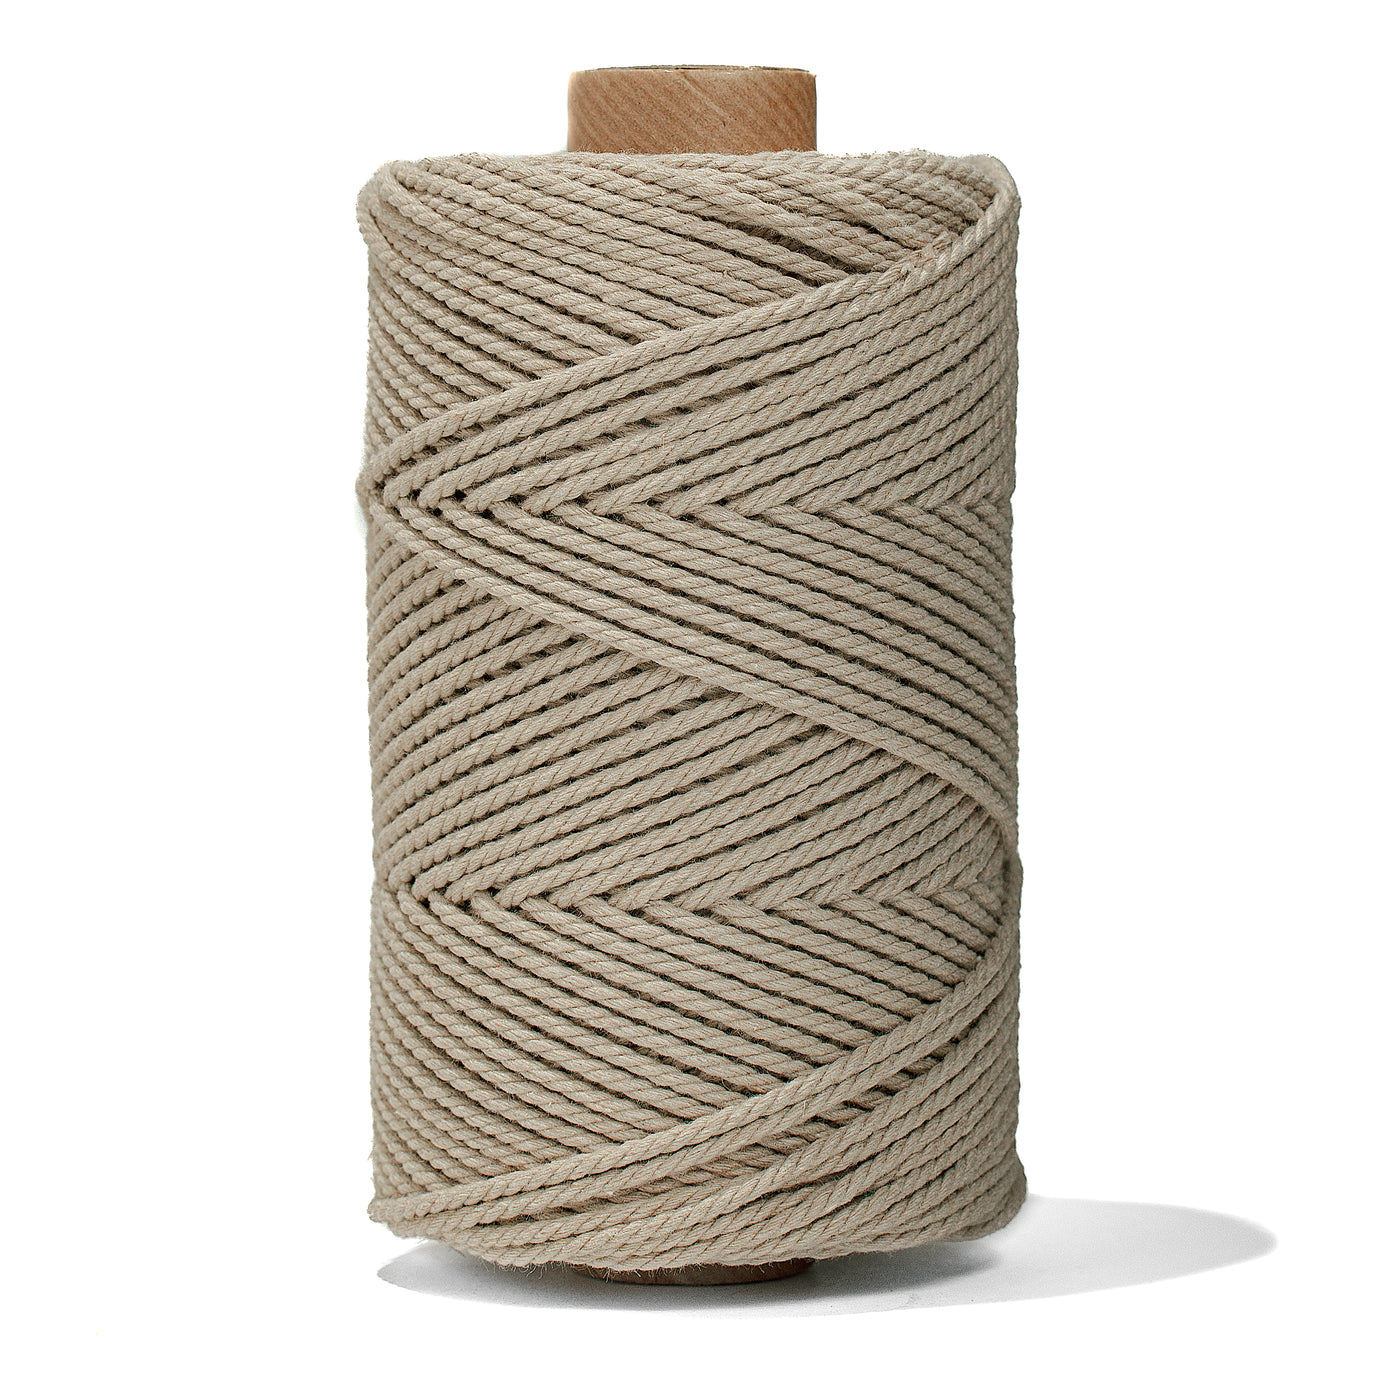 COTTON ROPE ZERO WASTE 2 MM - 3 PLY - BEIGE COLOR